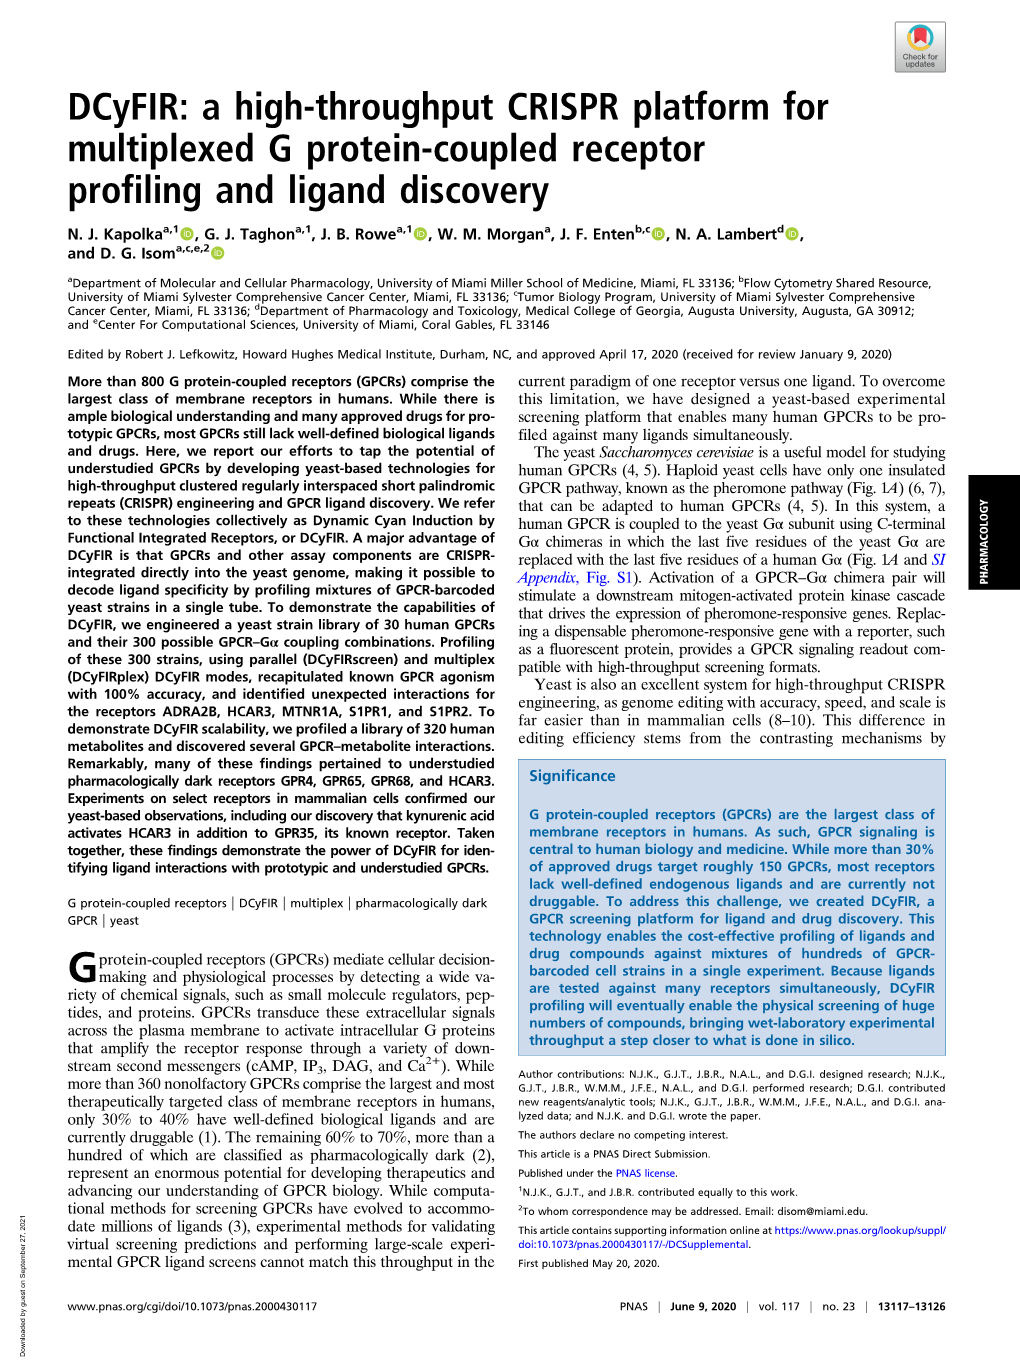 A High-Throughput CRISPR Platform for Multiplexed G Protein-Coupled Receptor Profiling and Ligand Discovery